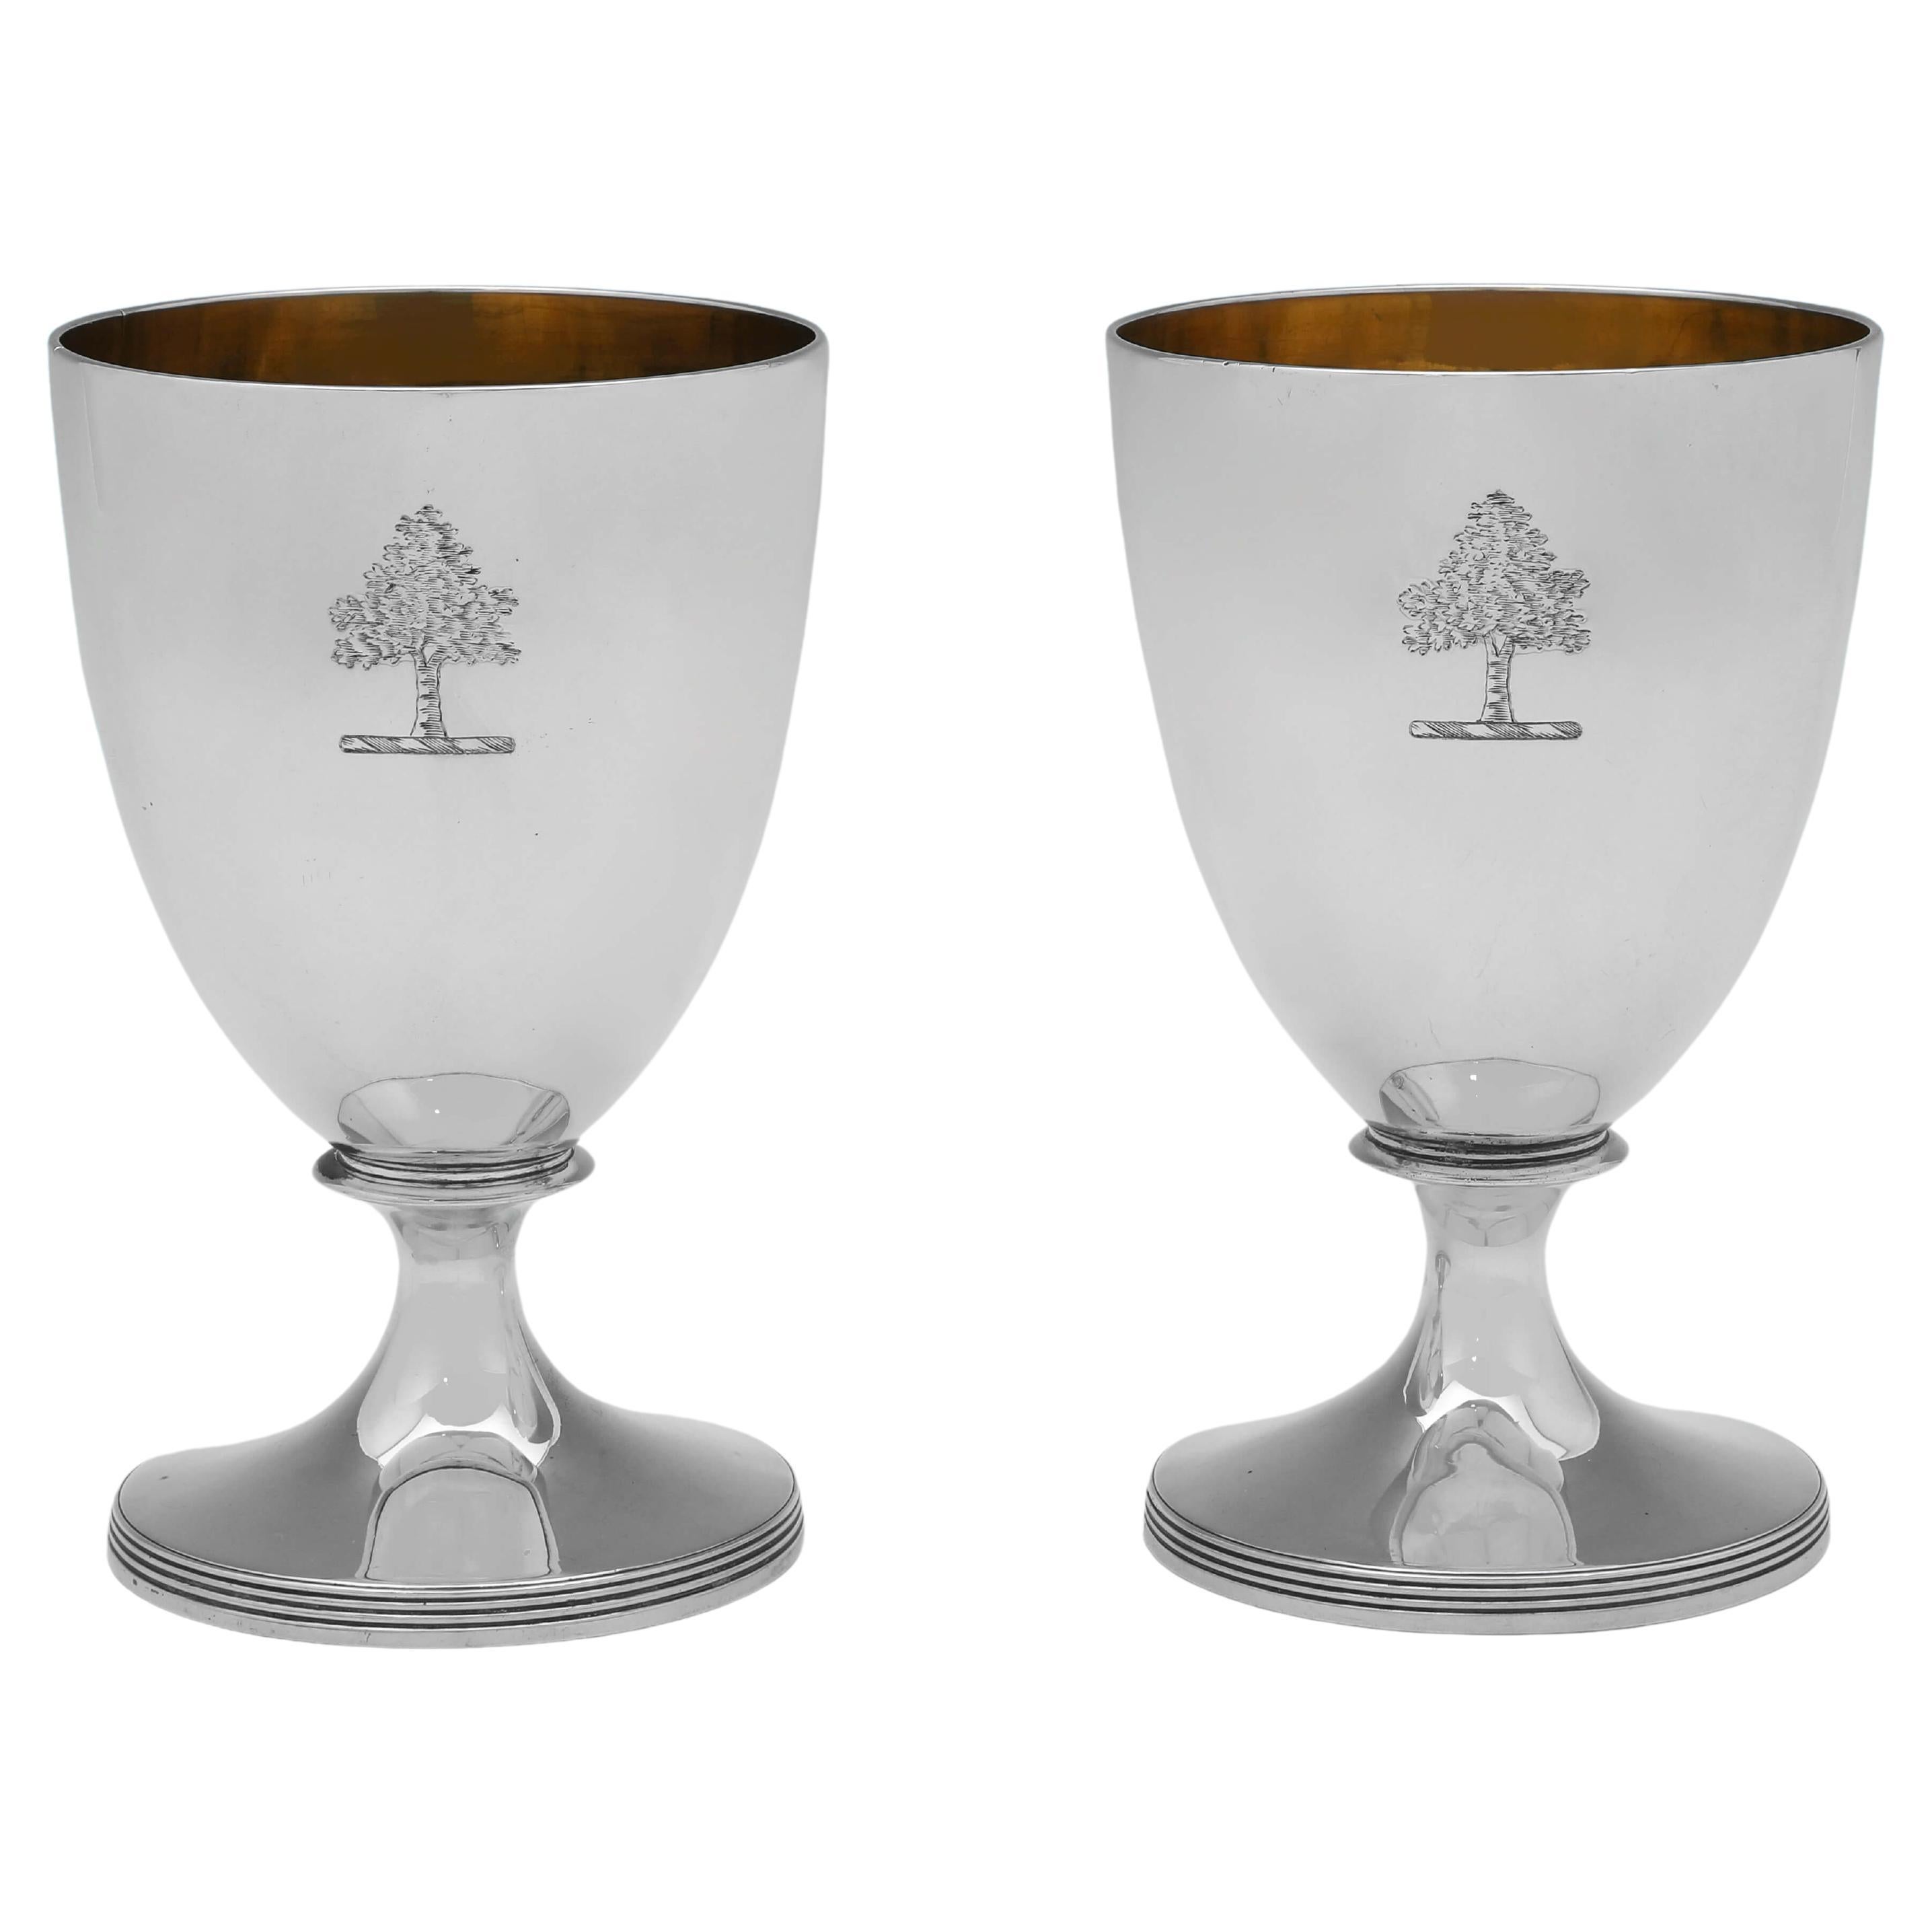 George III Period Pair of English Sterling Silver Goblets, London 1802 J. Emes